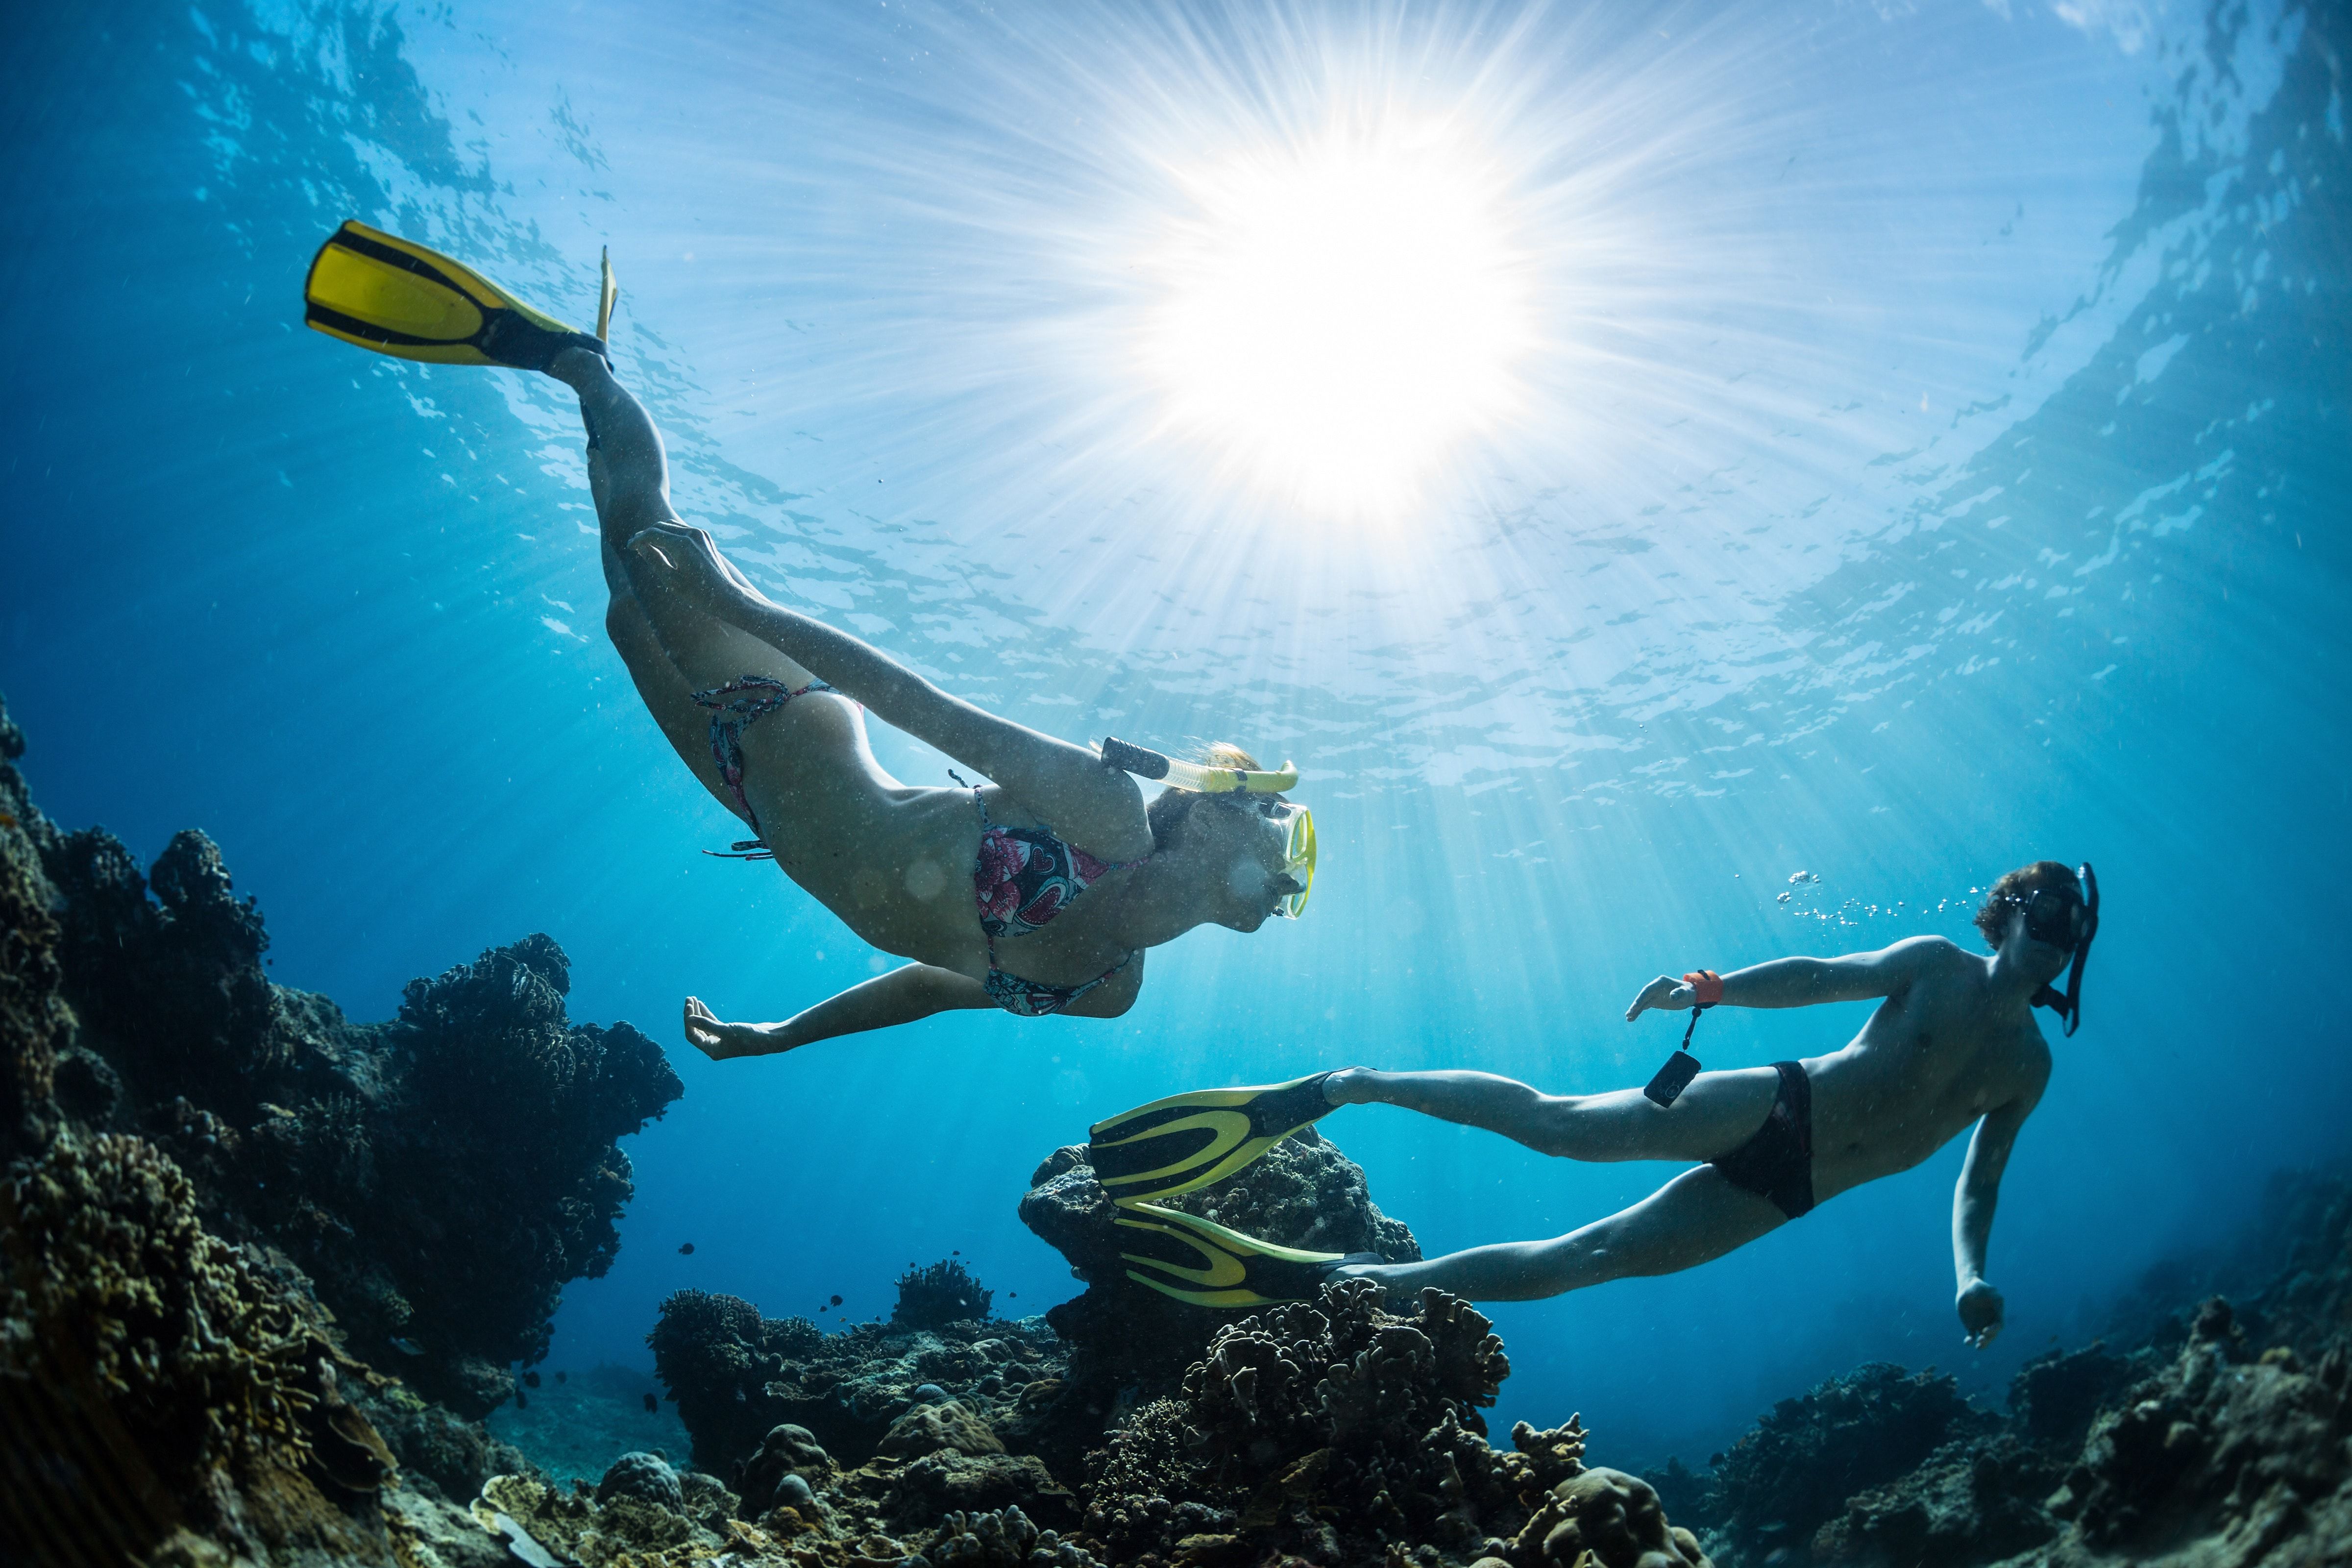 Snorkeling, Skin Diving, and Freediving Whats The Difference?